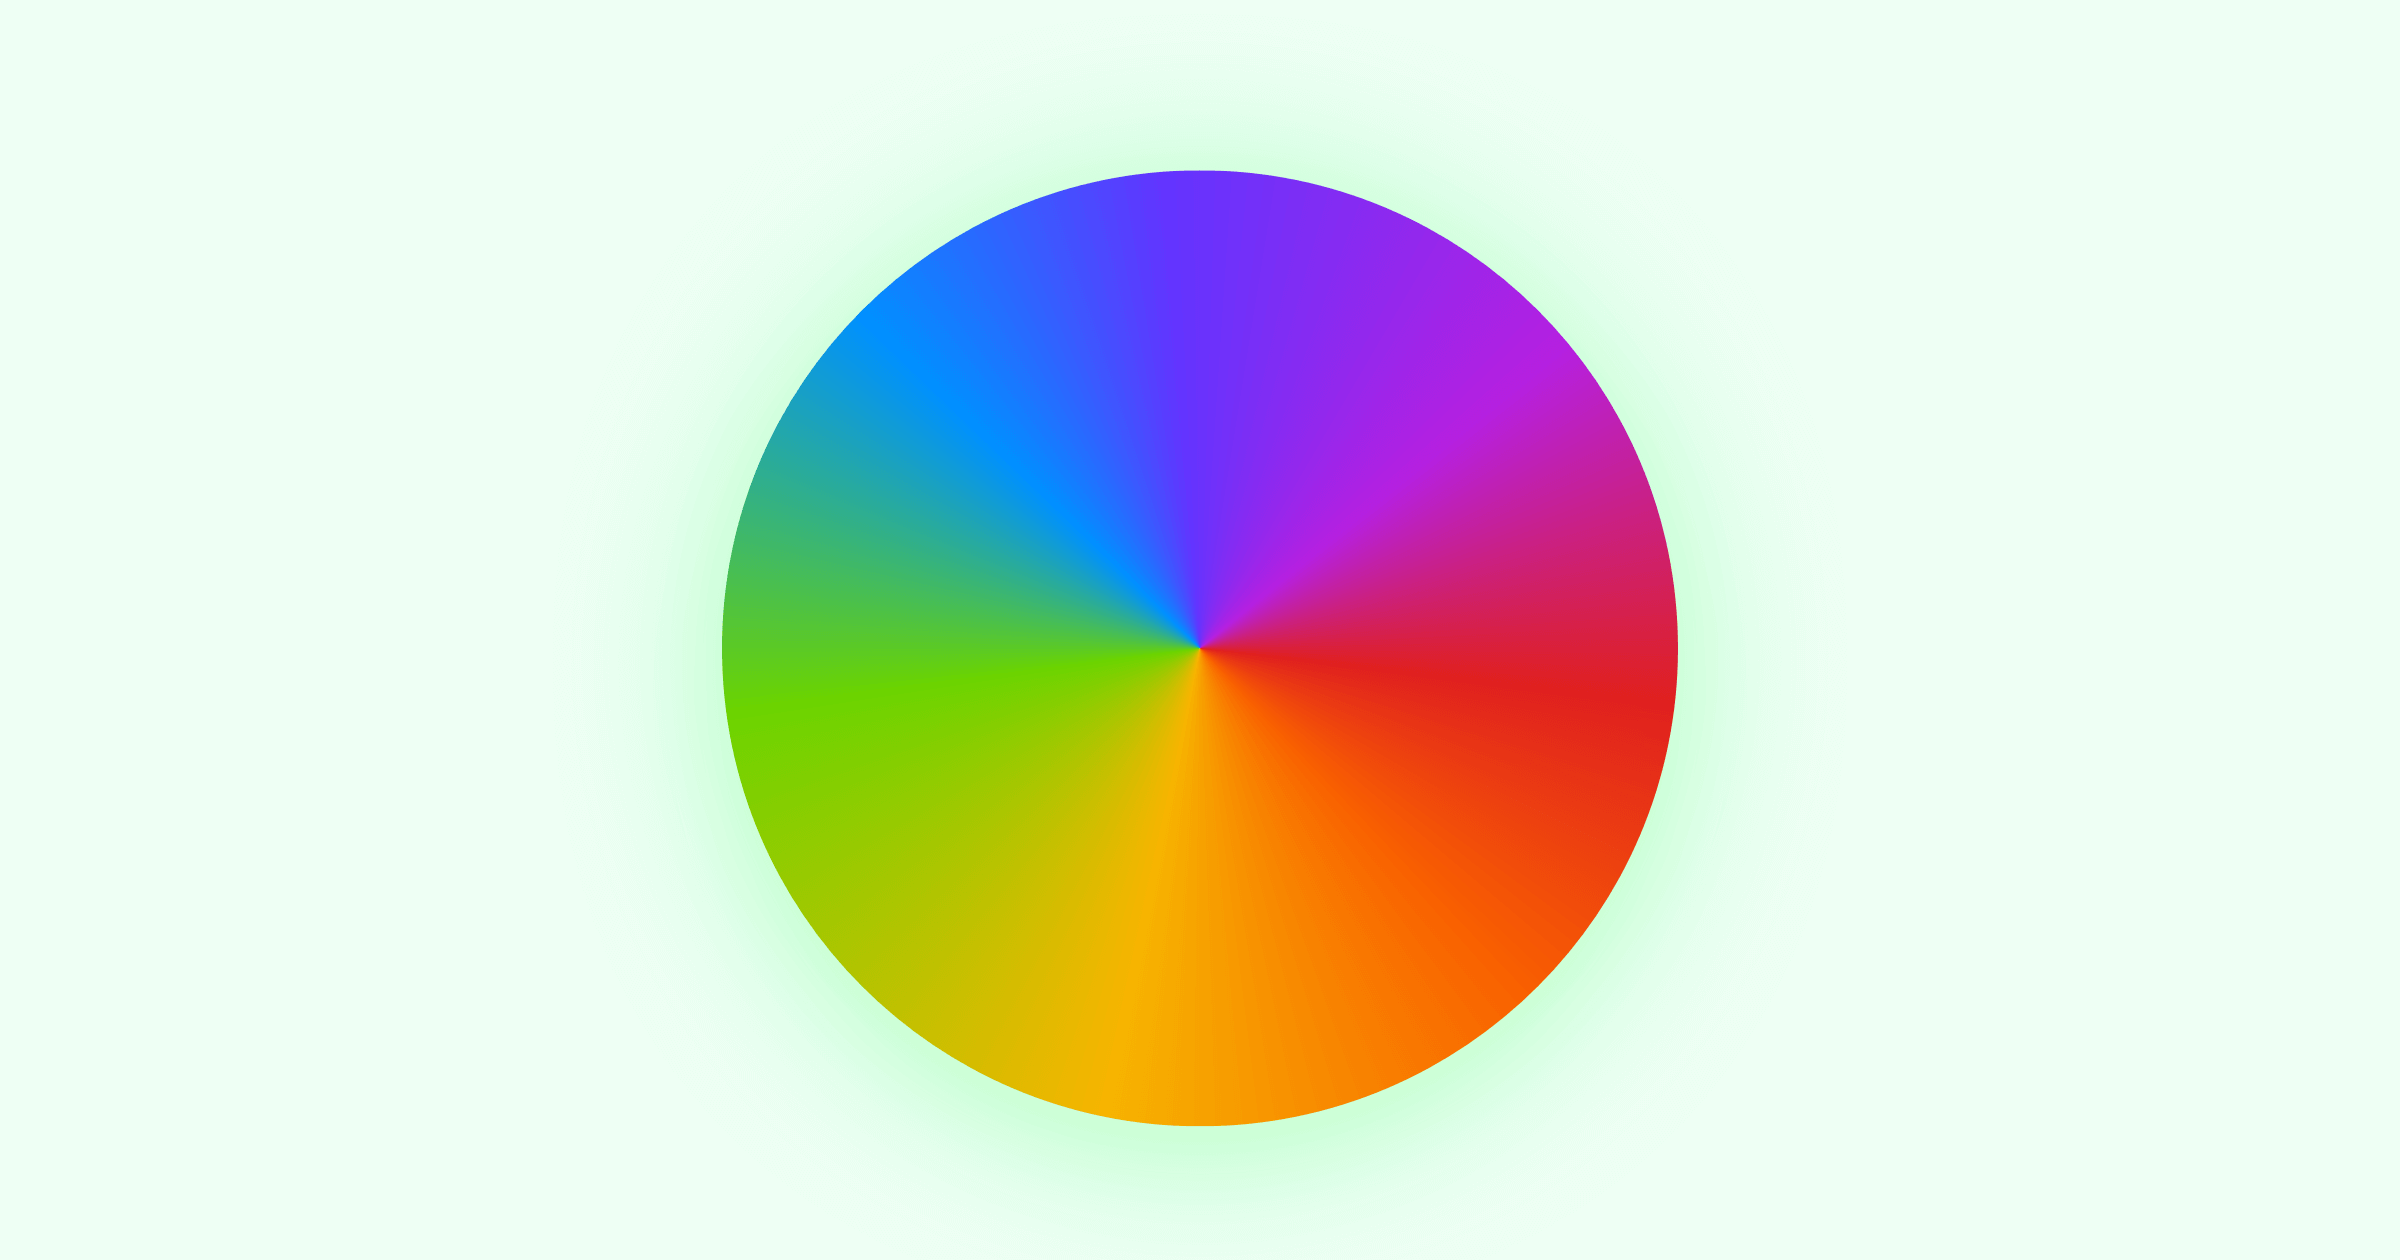 Colors of an app icon - 2022 edition